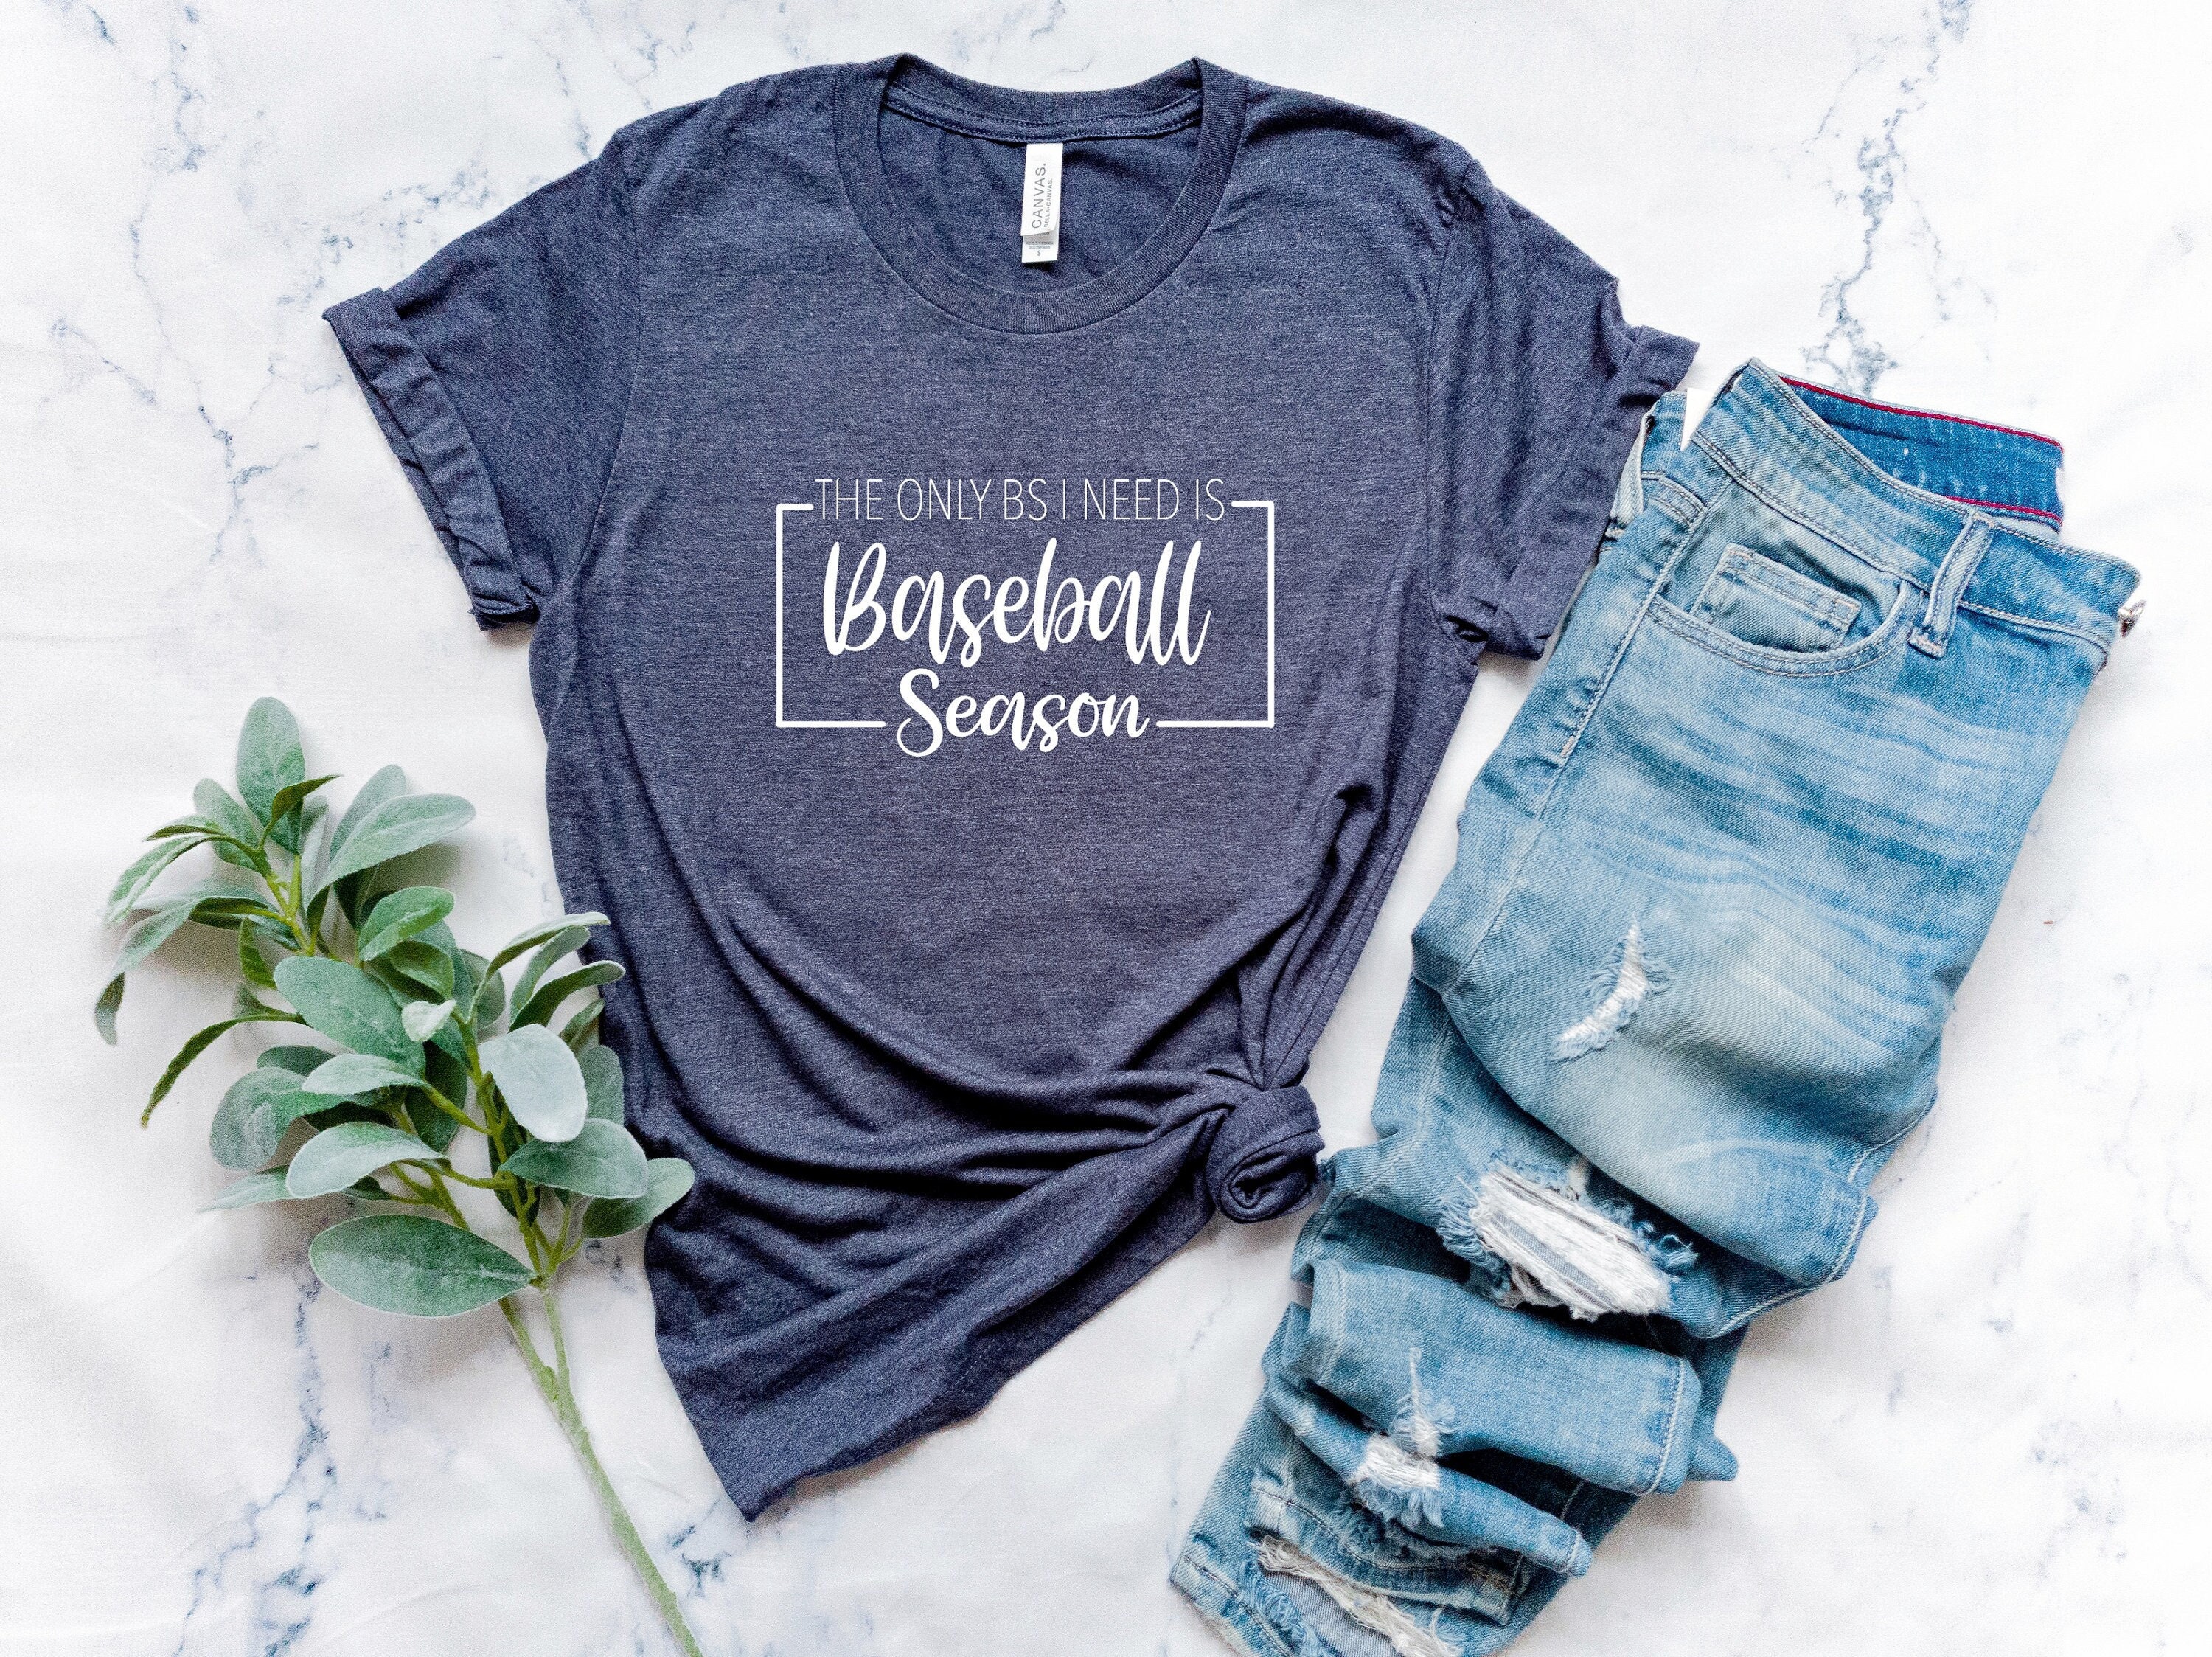 Discover Bs Baseball Season Tee, The Only Bs I Need Is Baseball Season Shirt, Baseball Lover T-Shirt